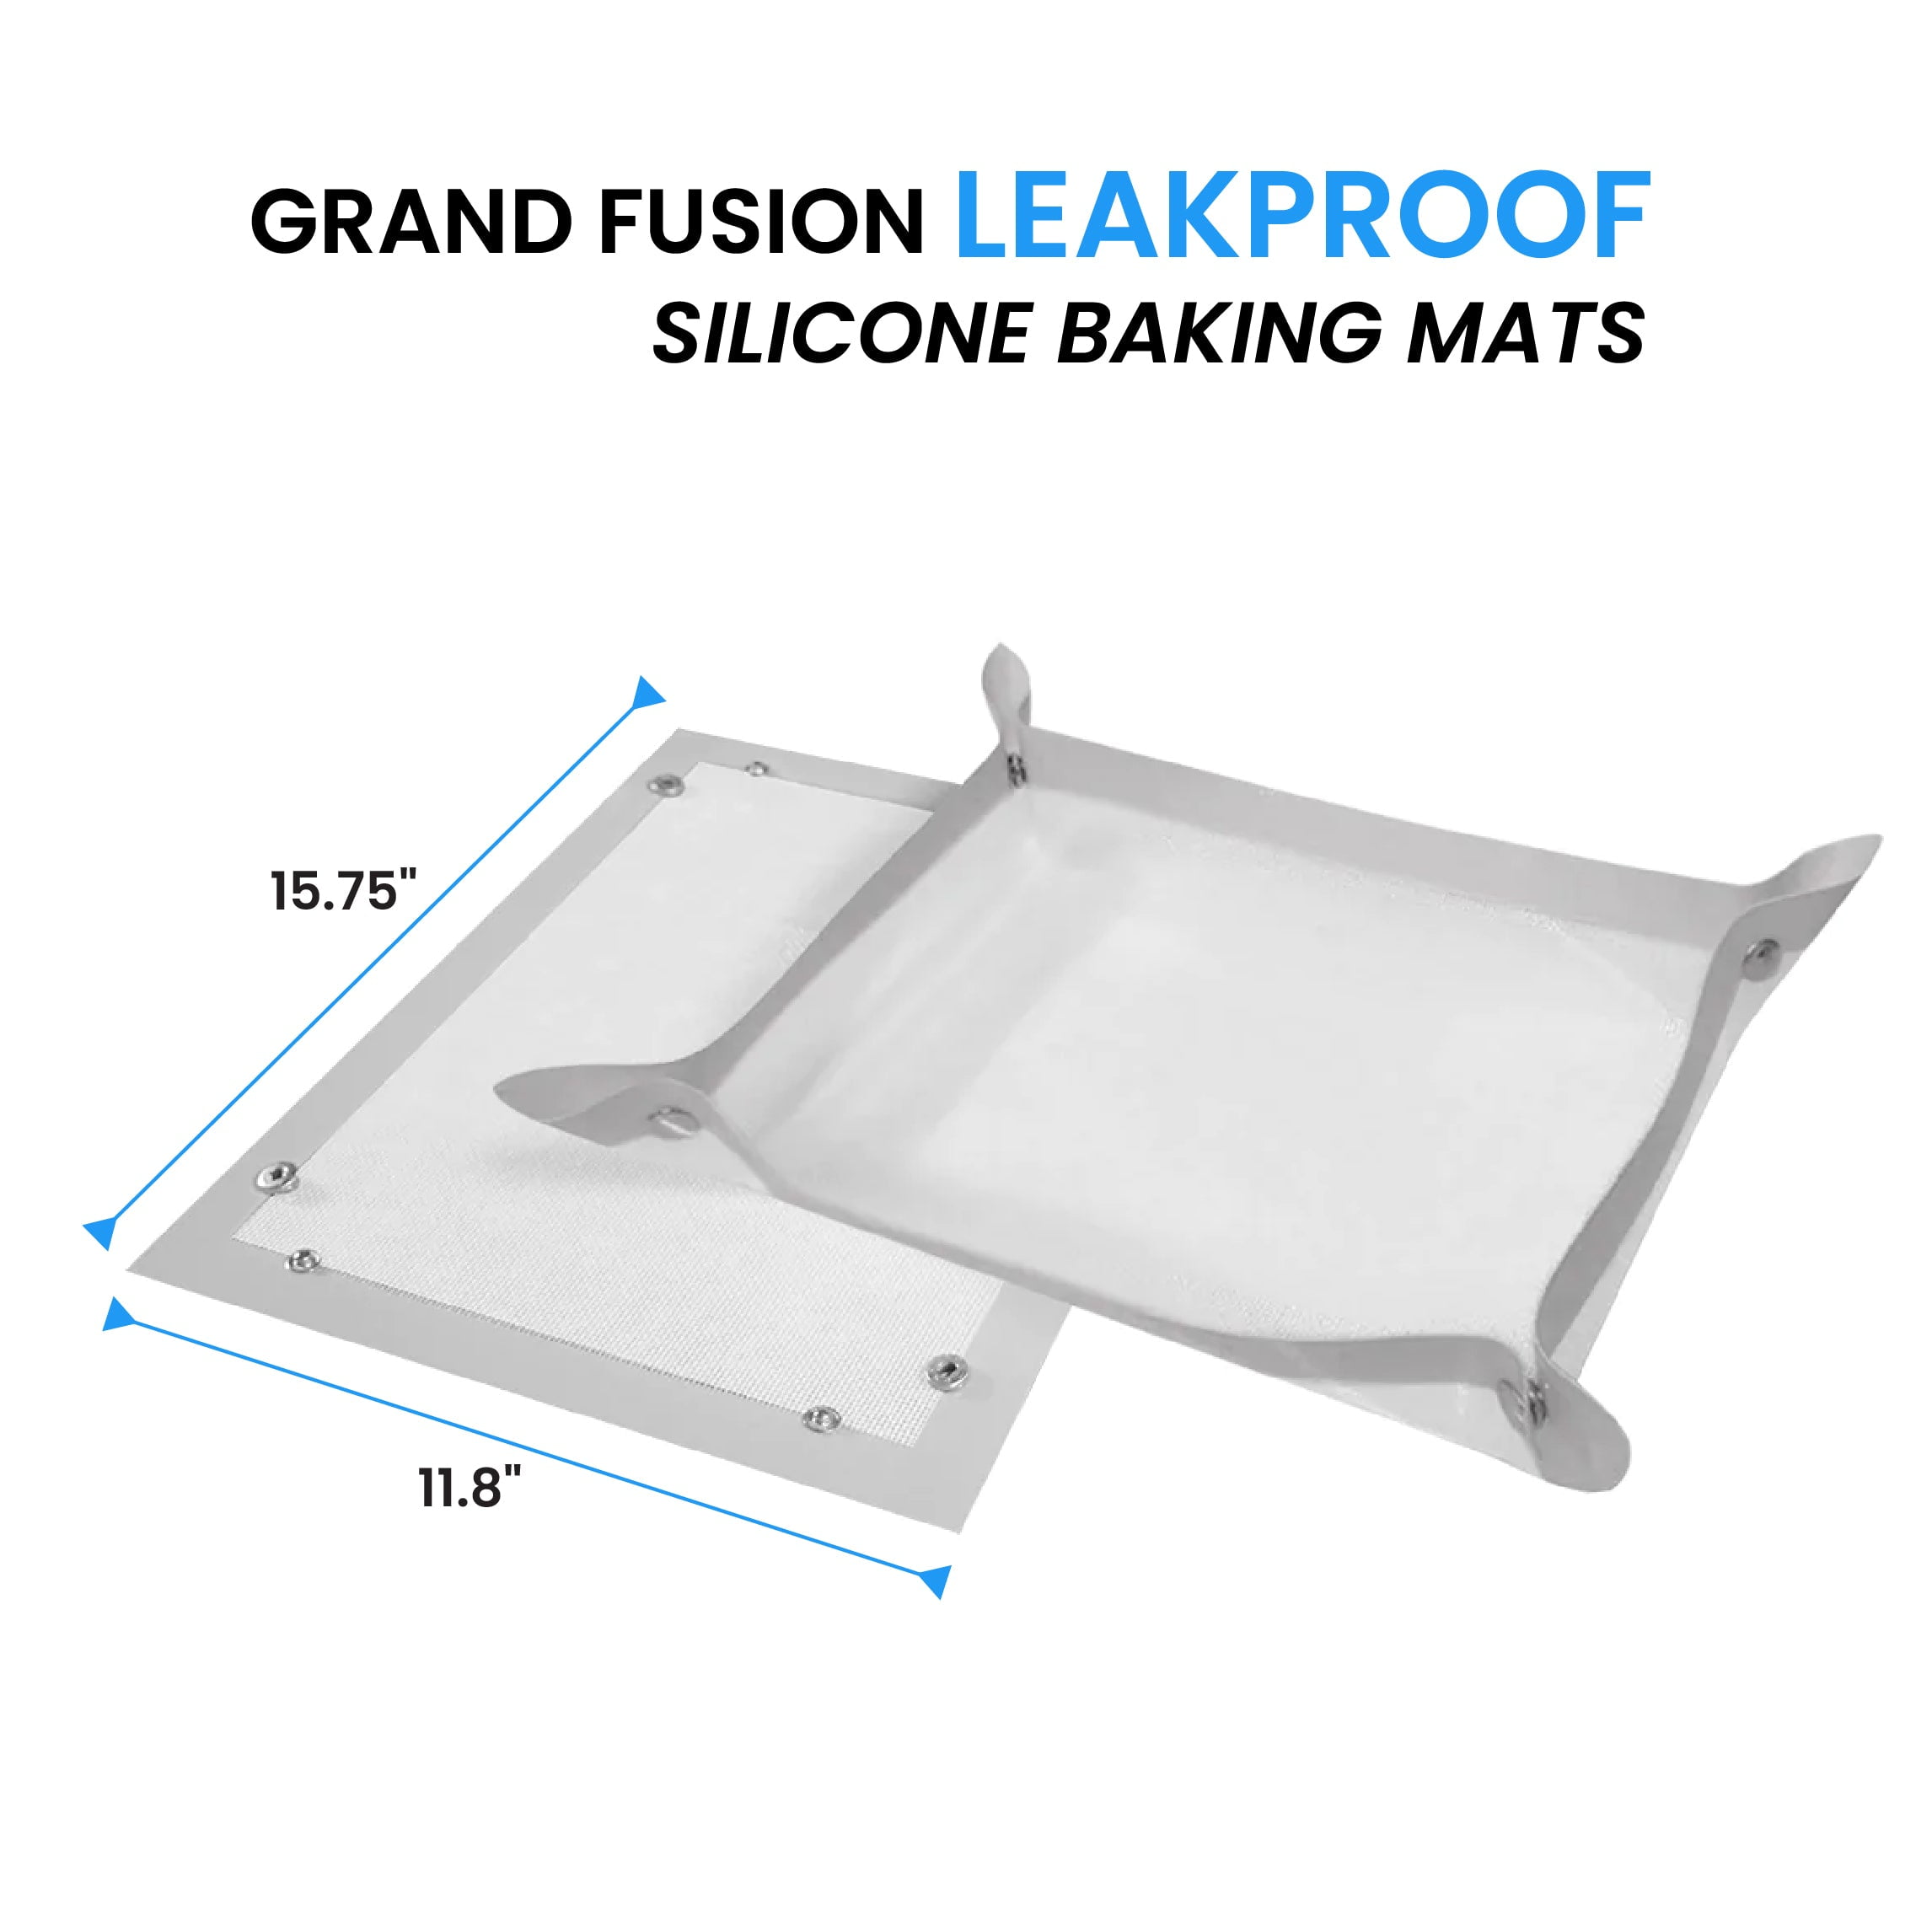 The Best Silicone Baking Mat in 2022